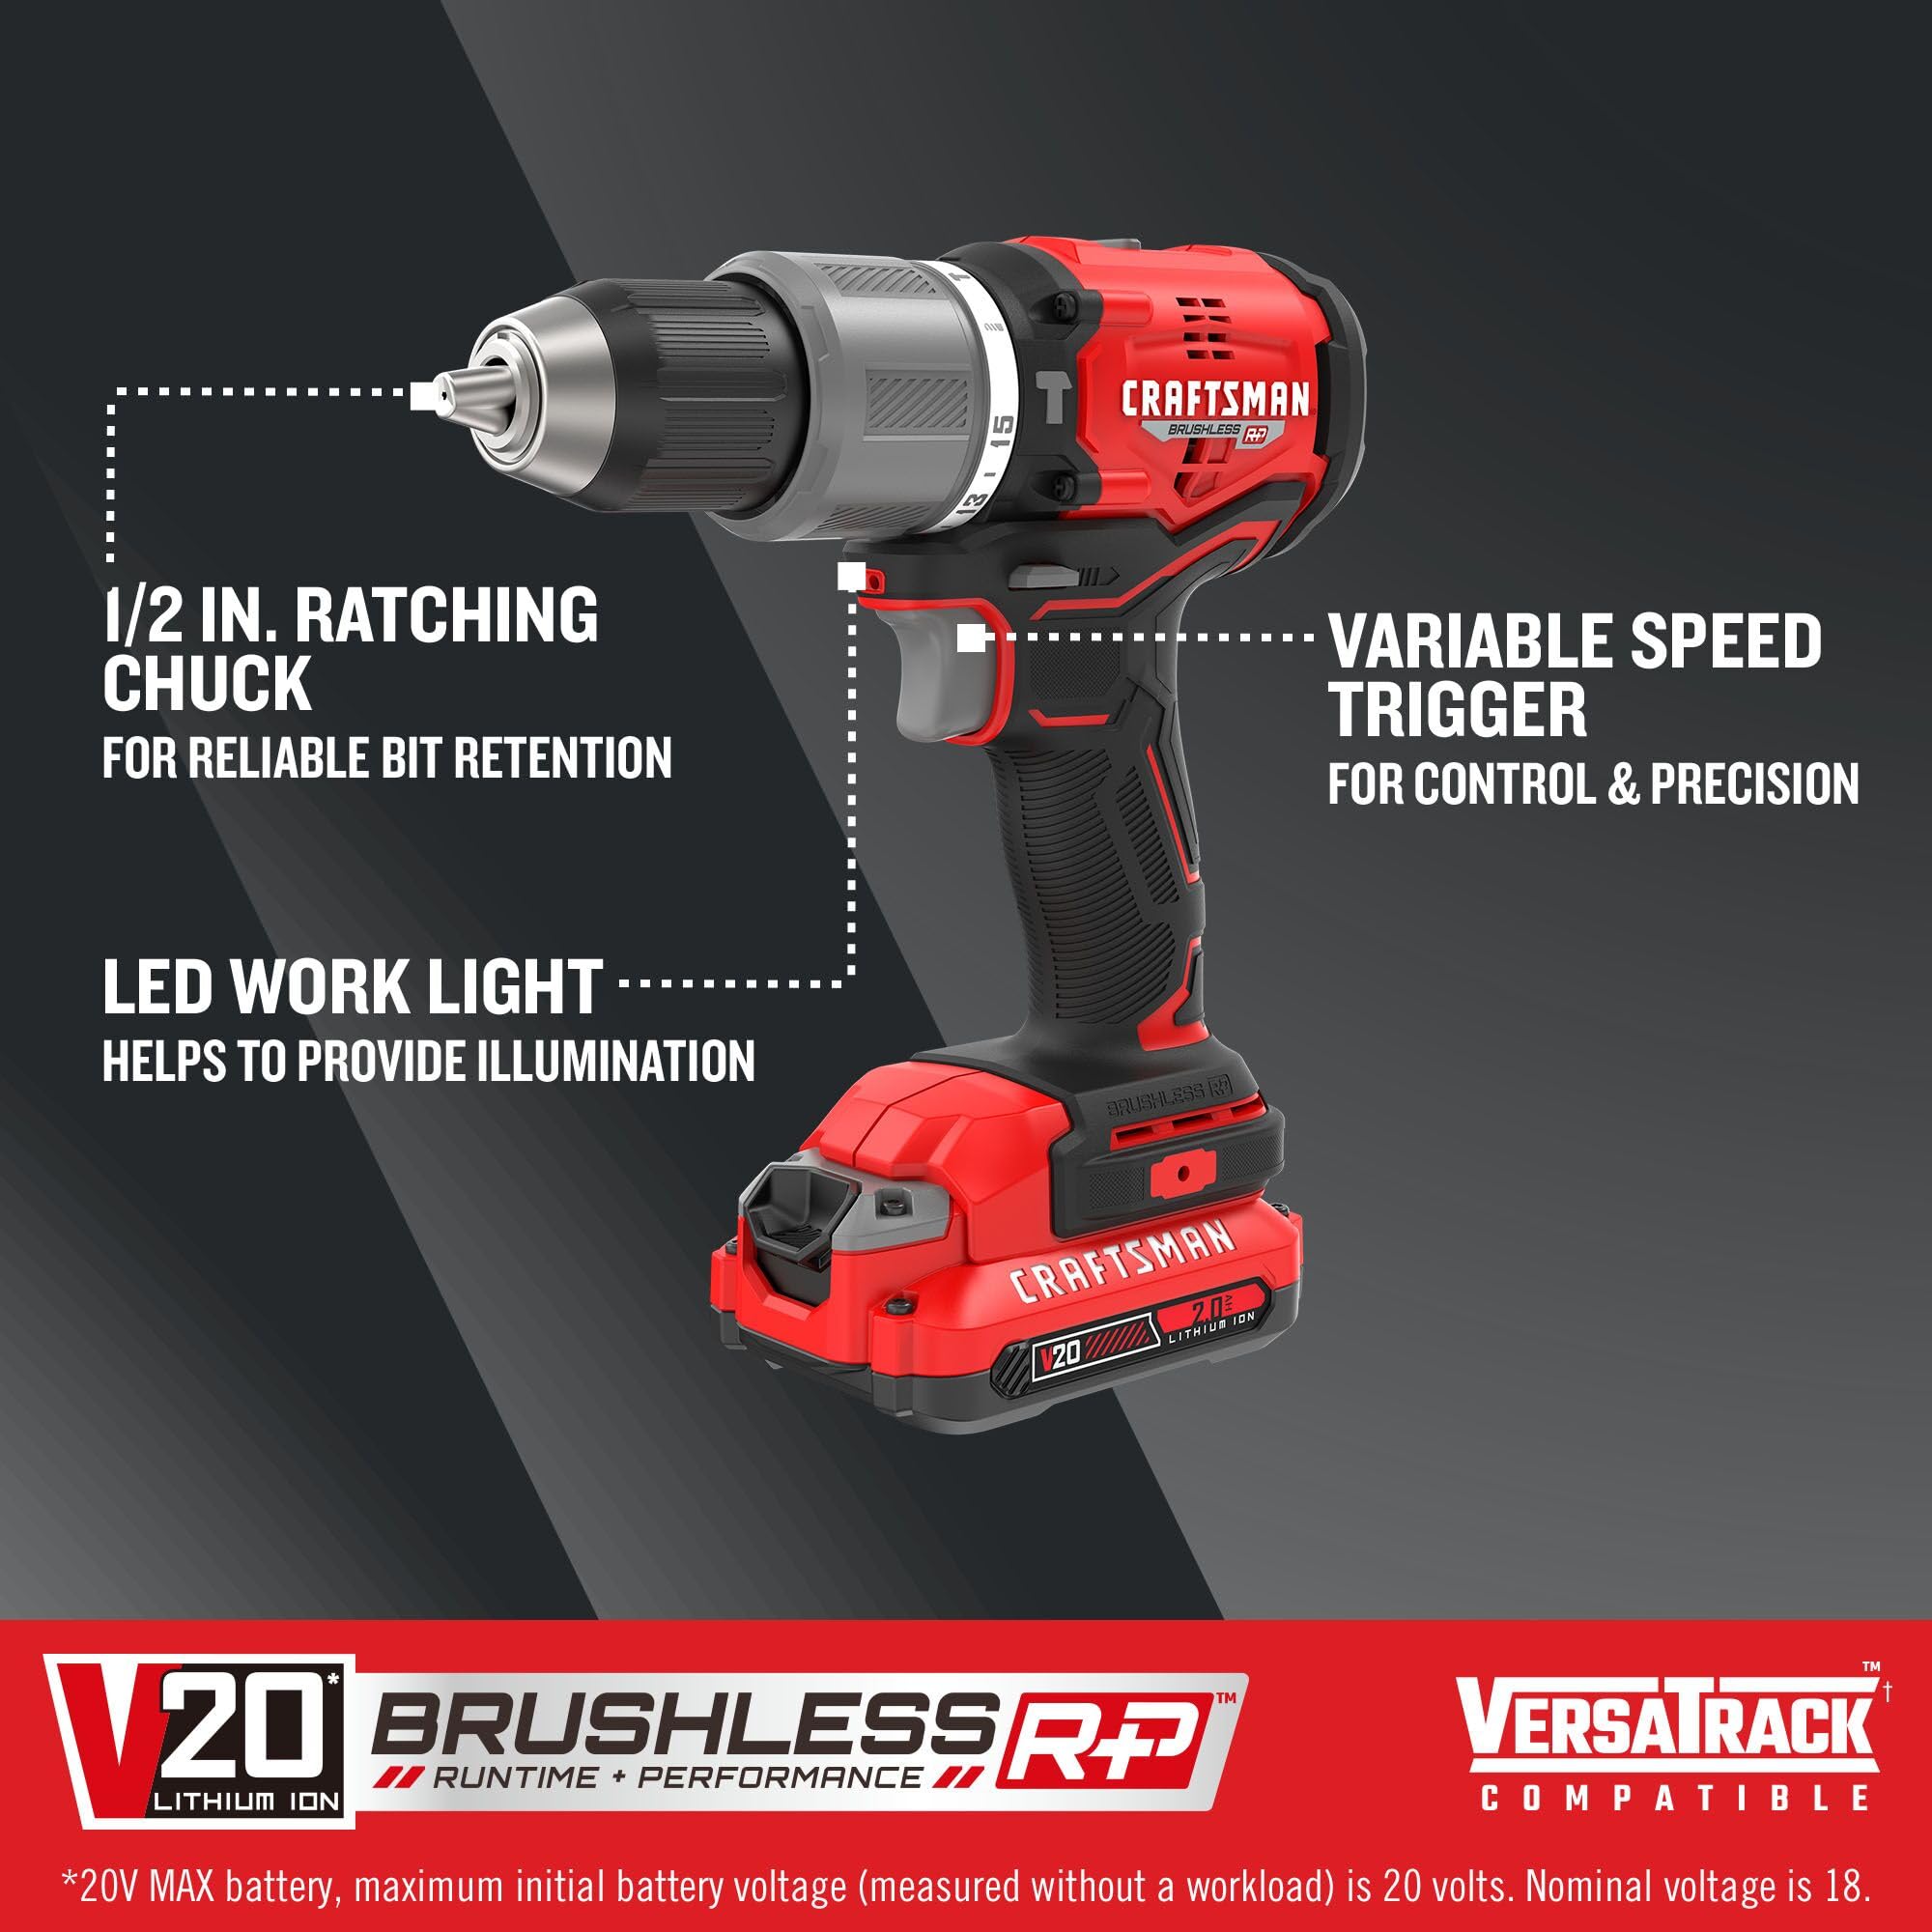 CRAFTSMAN V20 Cordless Hammer Drill Kit, 1/2 inch, 2 Batteries and Charger Included (CMCD732D2)